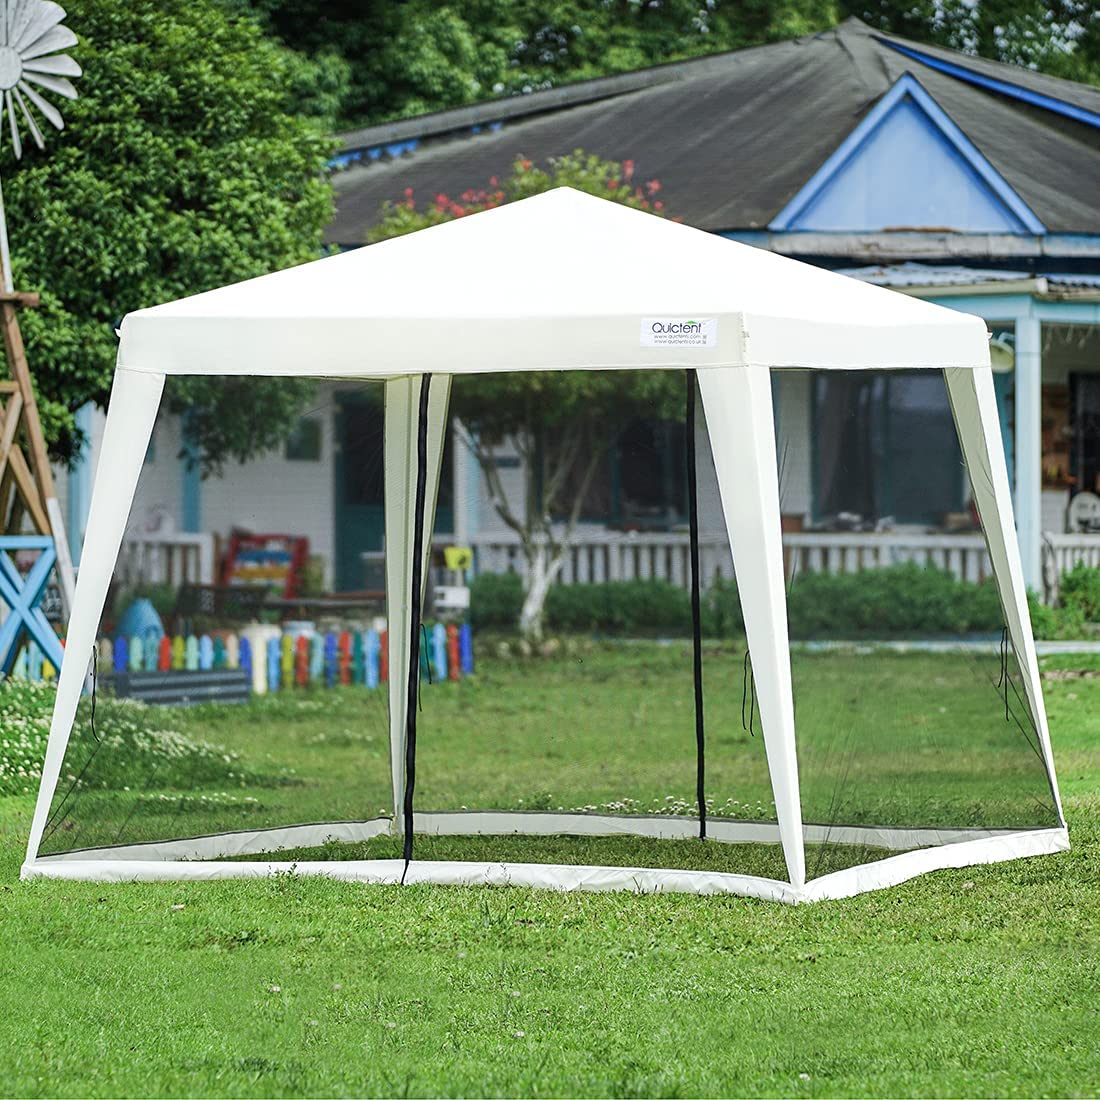 Quictent 10' x 8' mesh netting party tent is standing in the wild